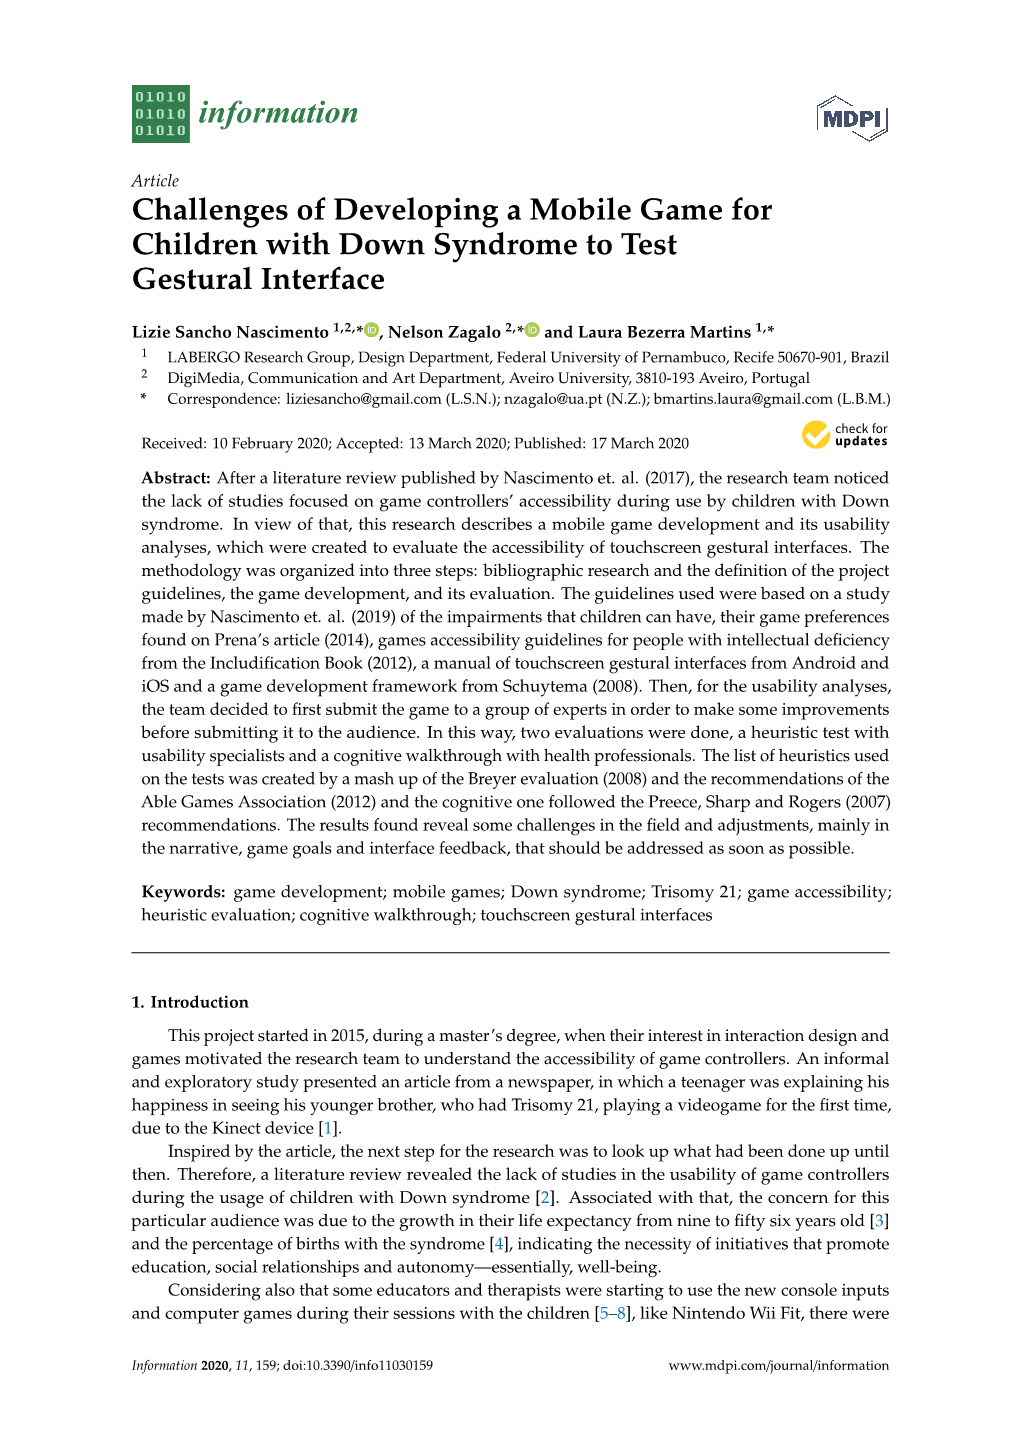 Challenges of Developing a Mobile Game for Children with Down Syndrome to Test Gestural Interface